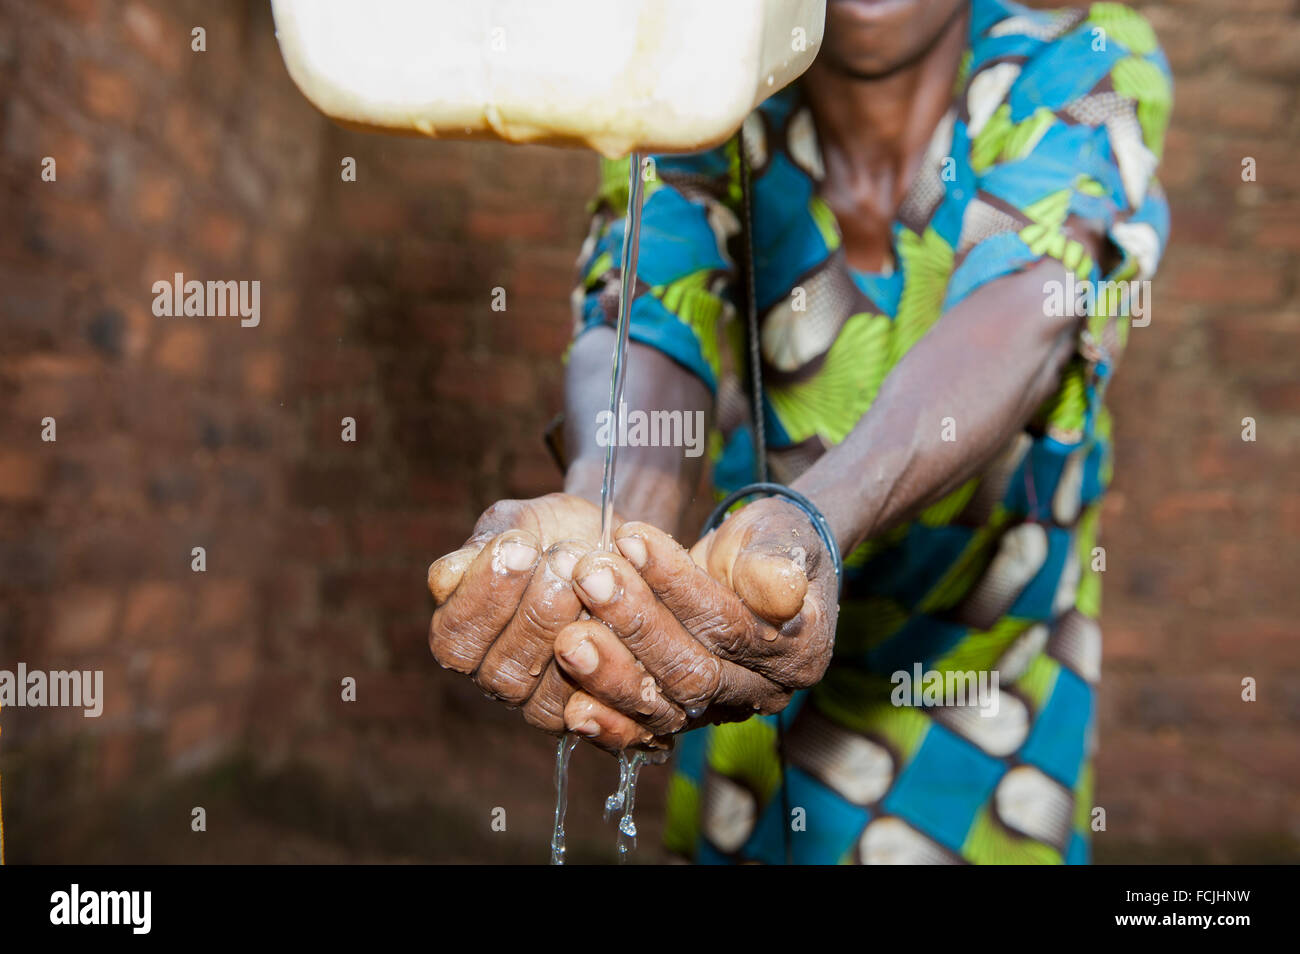 Lady washing hands from a 'Tip Tap' an efficent way to clean hands without wasting water. Uganda. Stock Photo